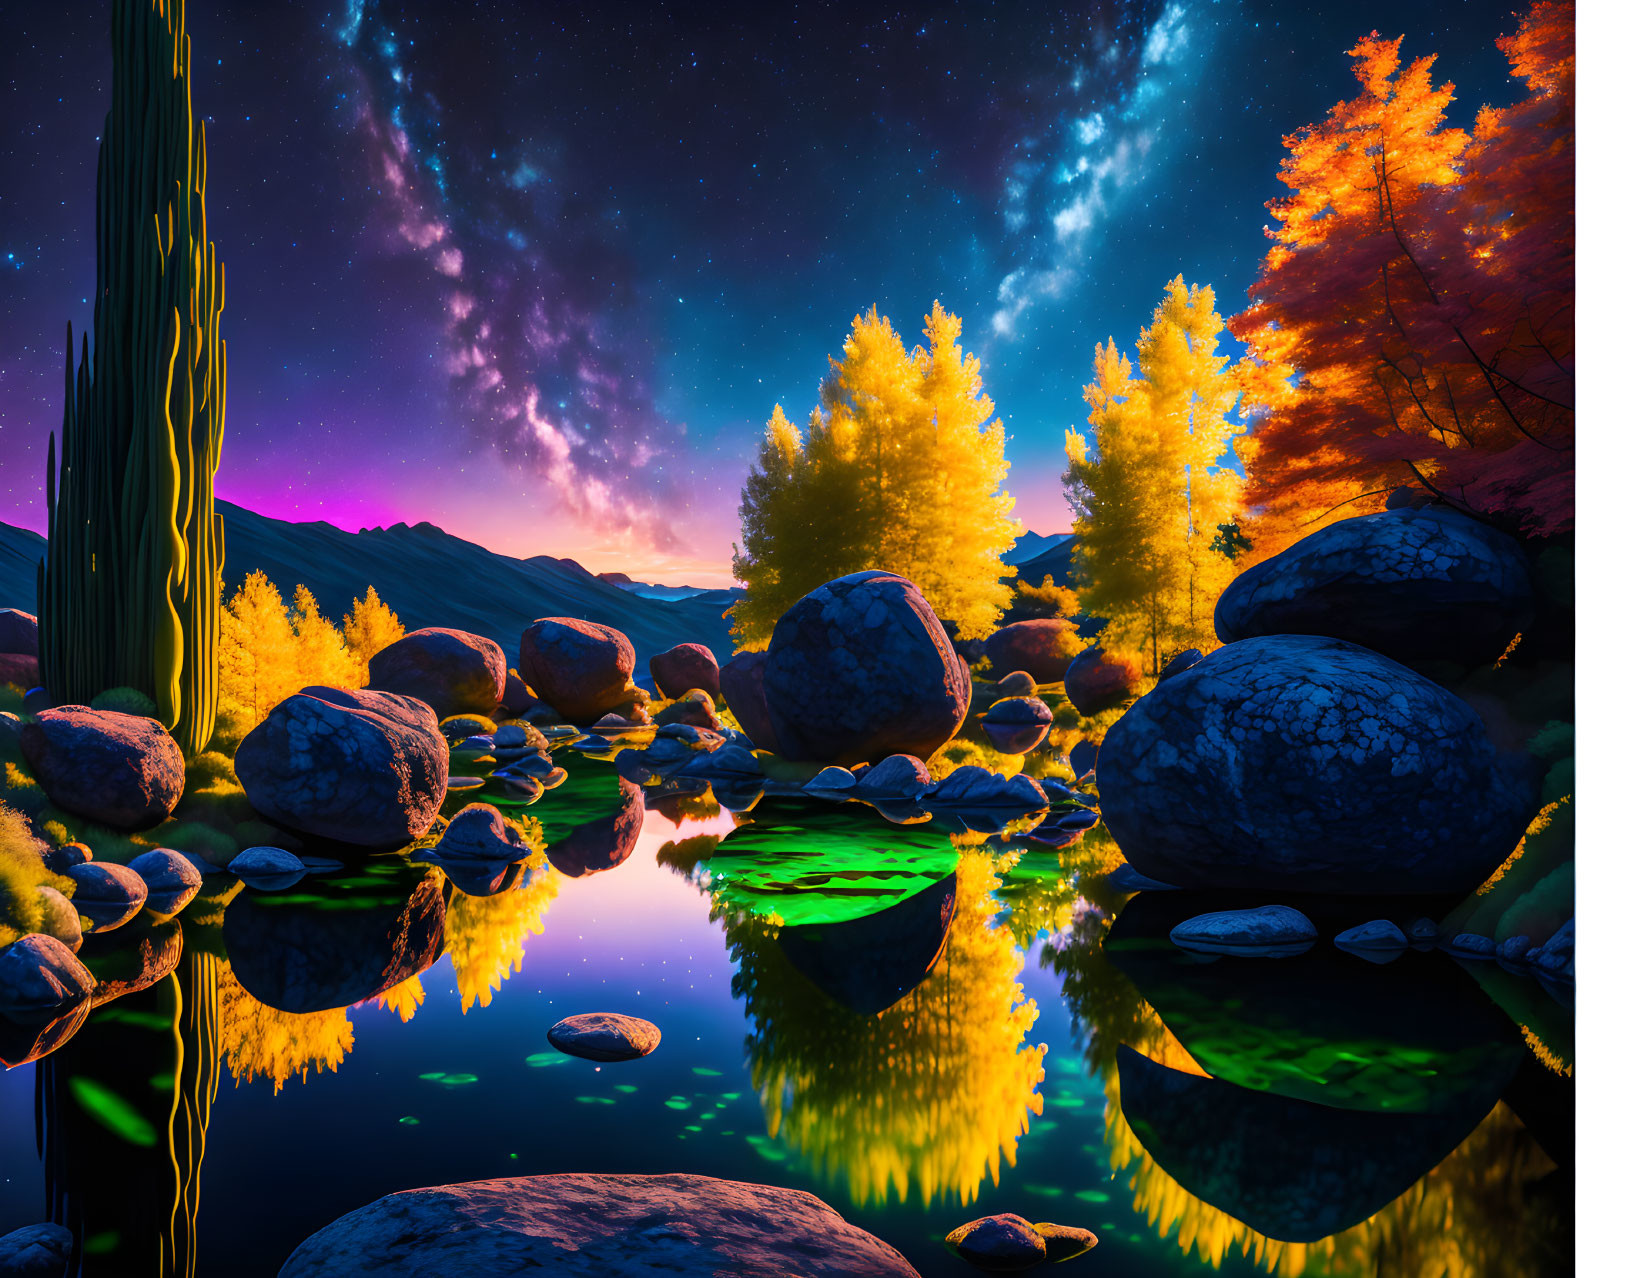 Colorful Autumn Trees Reflecting in Lake Under Starry Sky